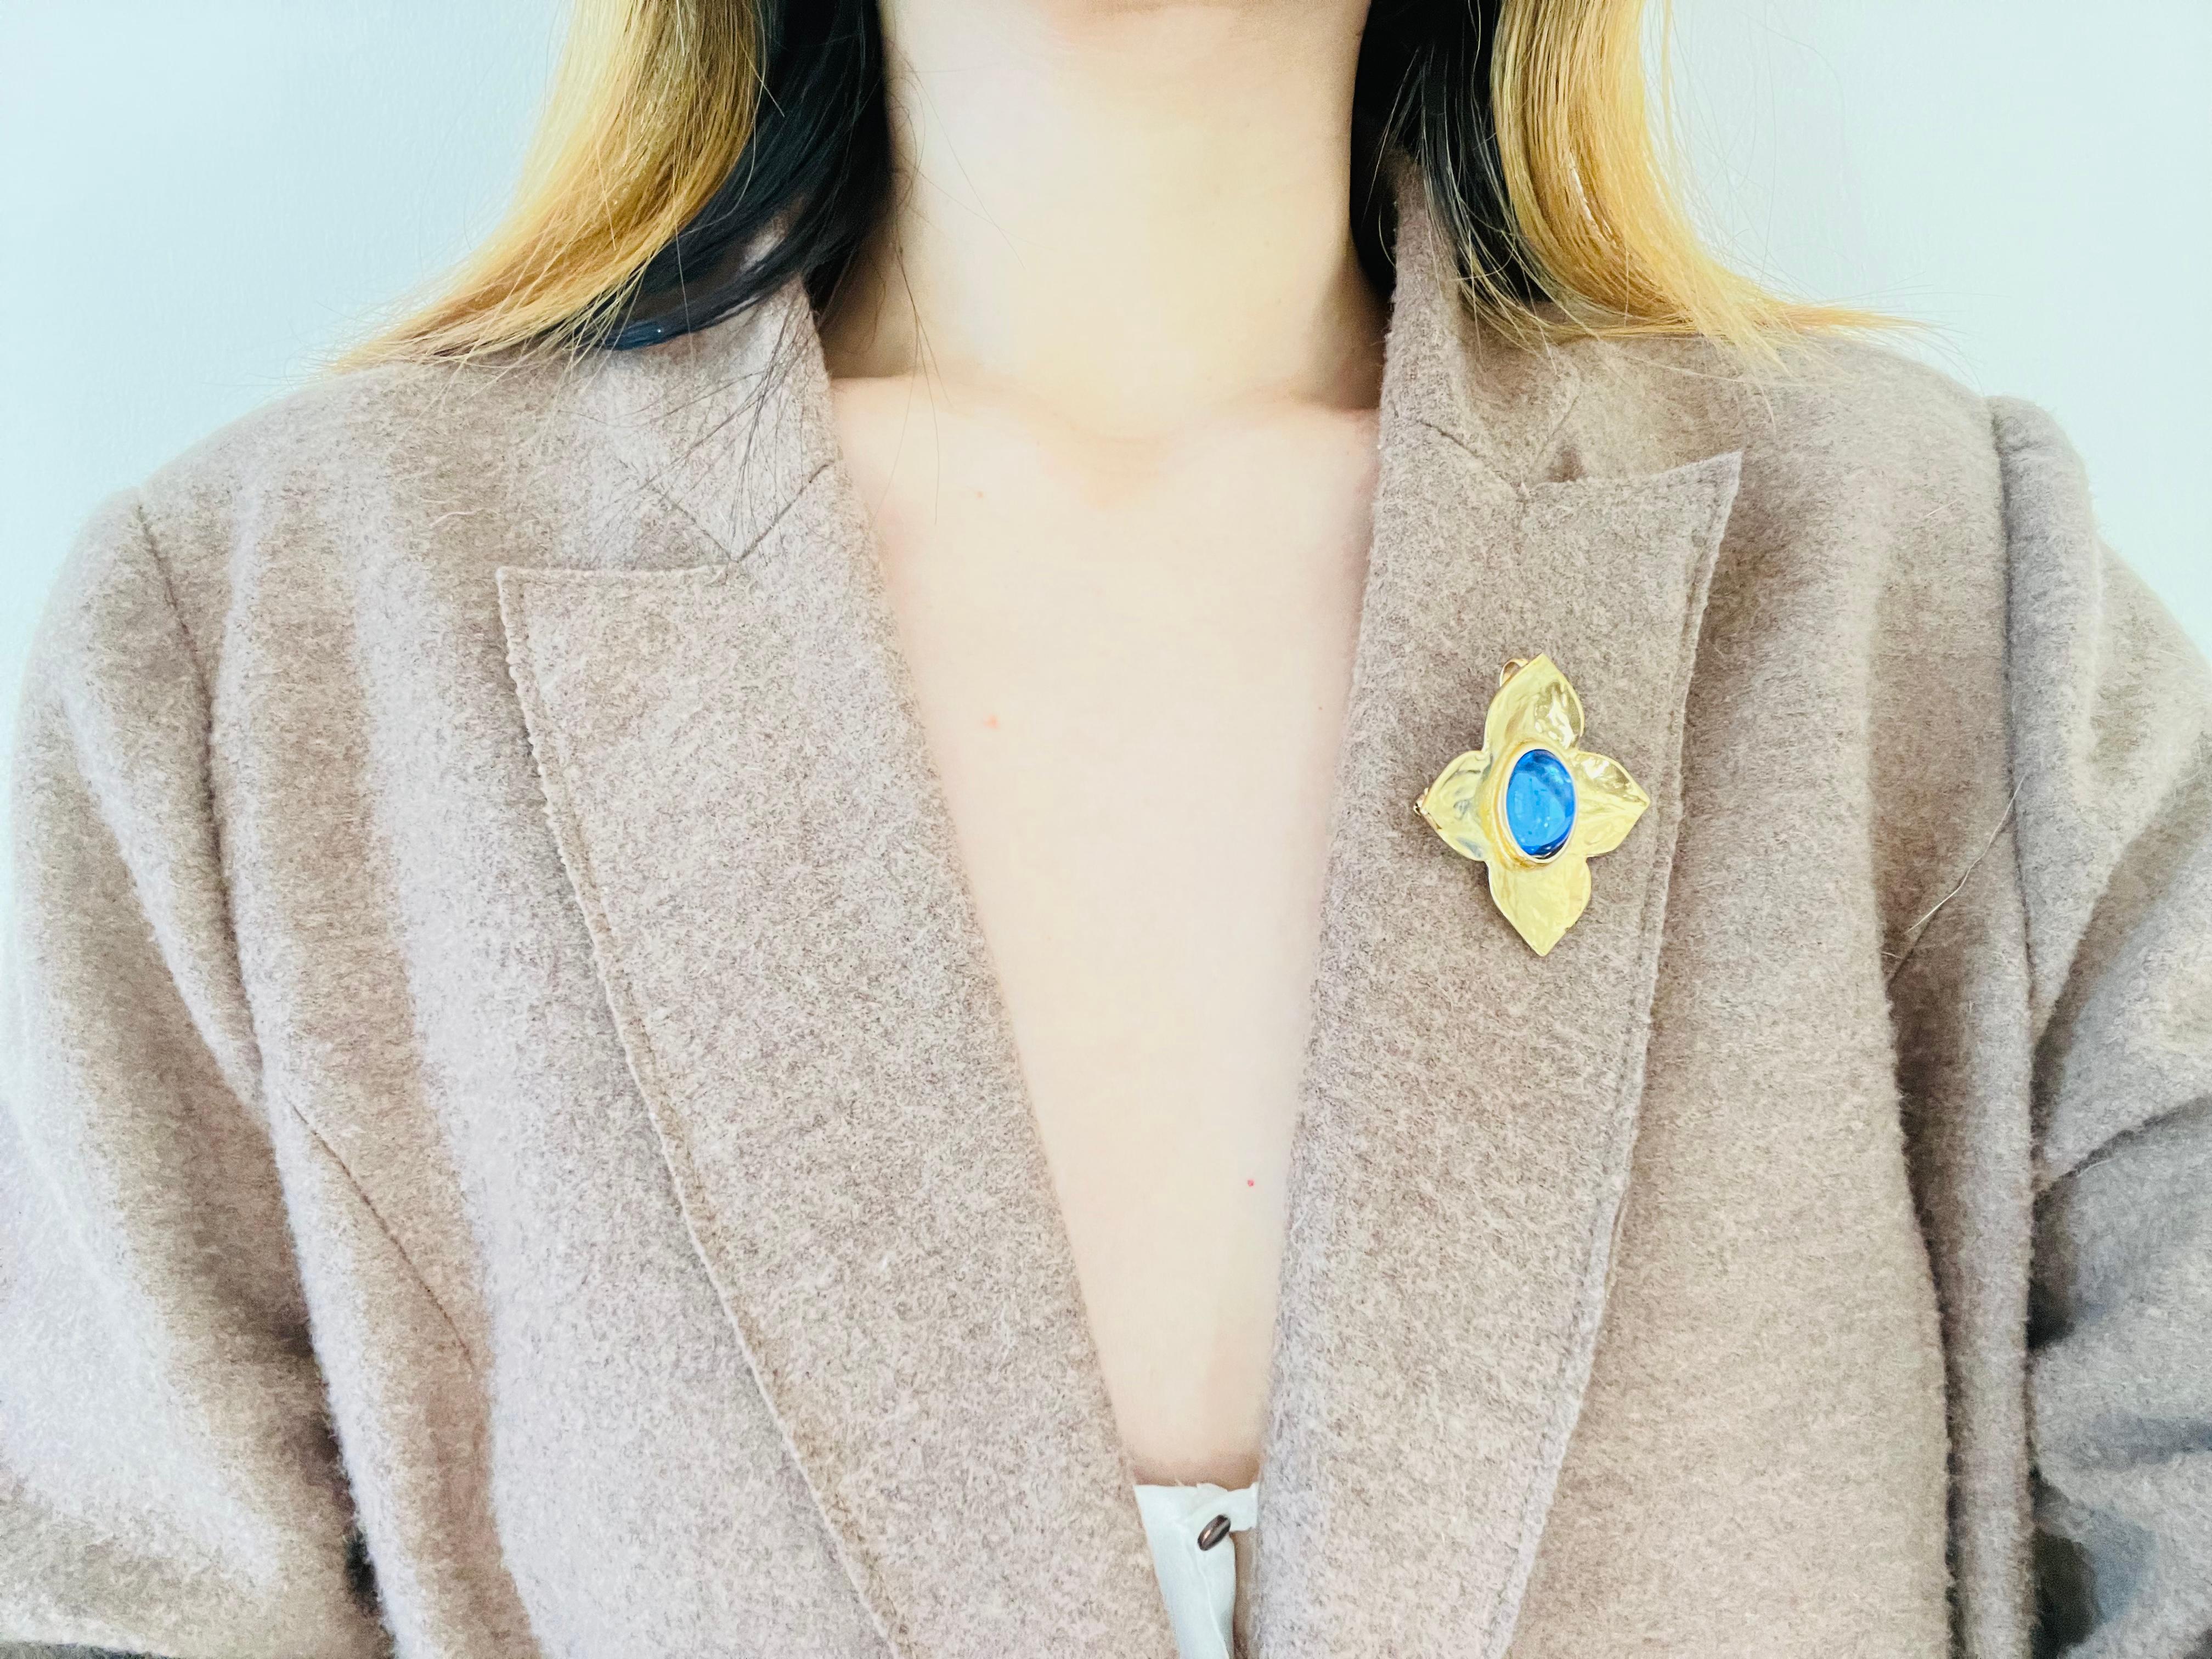 Yves Saint Laurent YSL Vintage Gripoix Sapphire Oval Crystal Brooch Gold Pendant In Excellent Condition For Sale In Wokingham, England